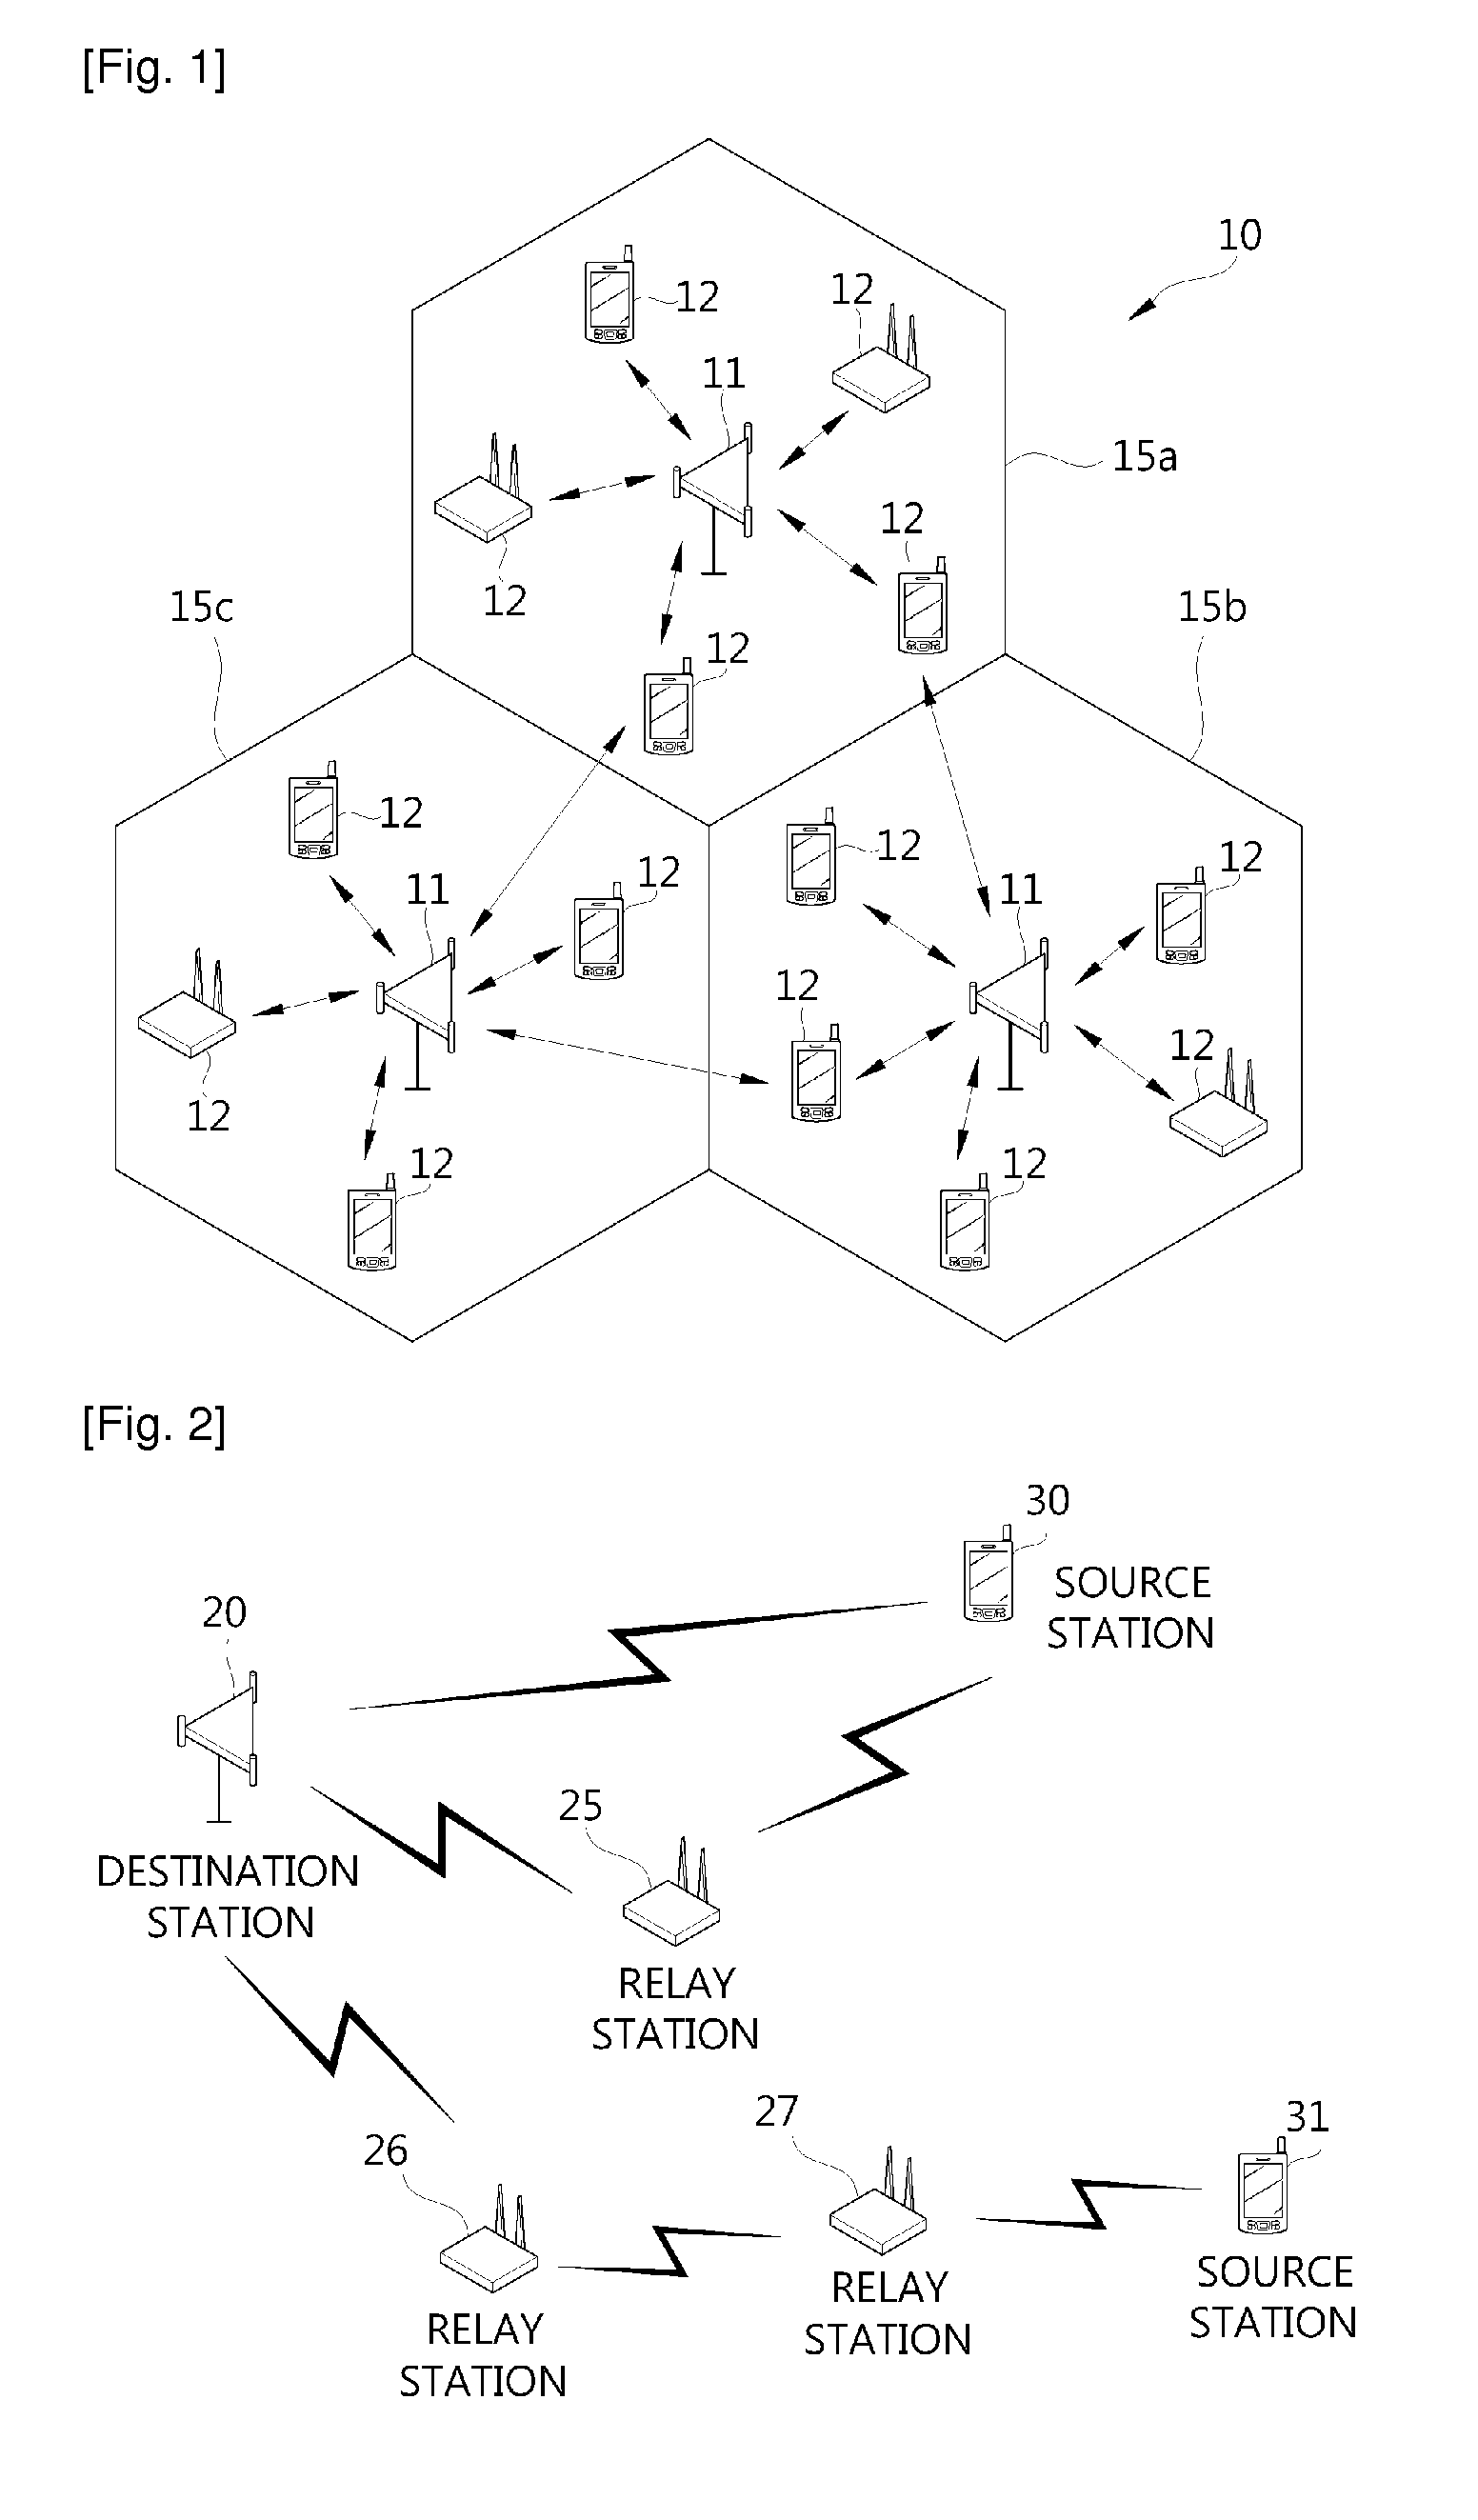 Method for relaying data in wireless communication system based on time division duplex